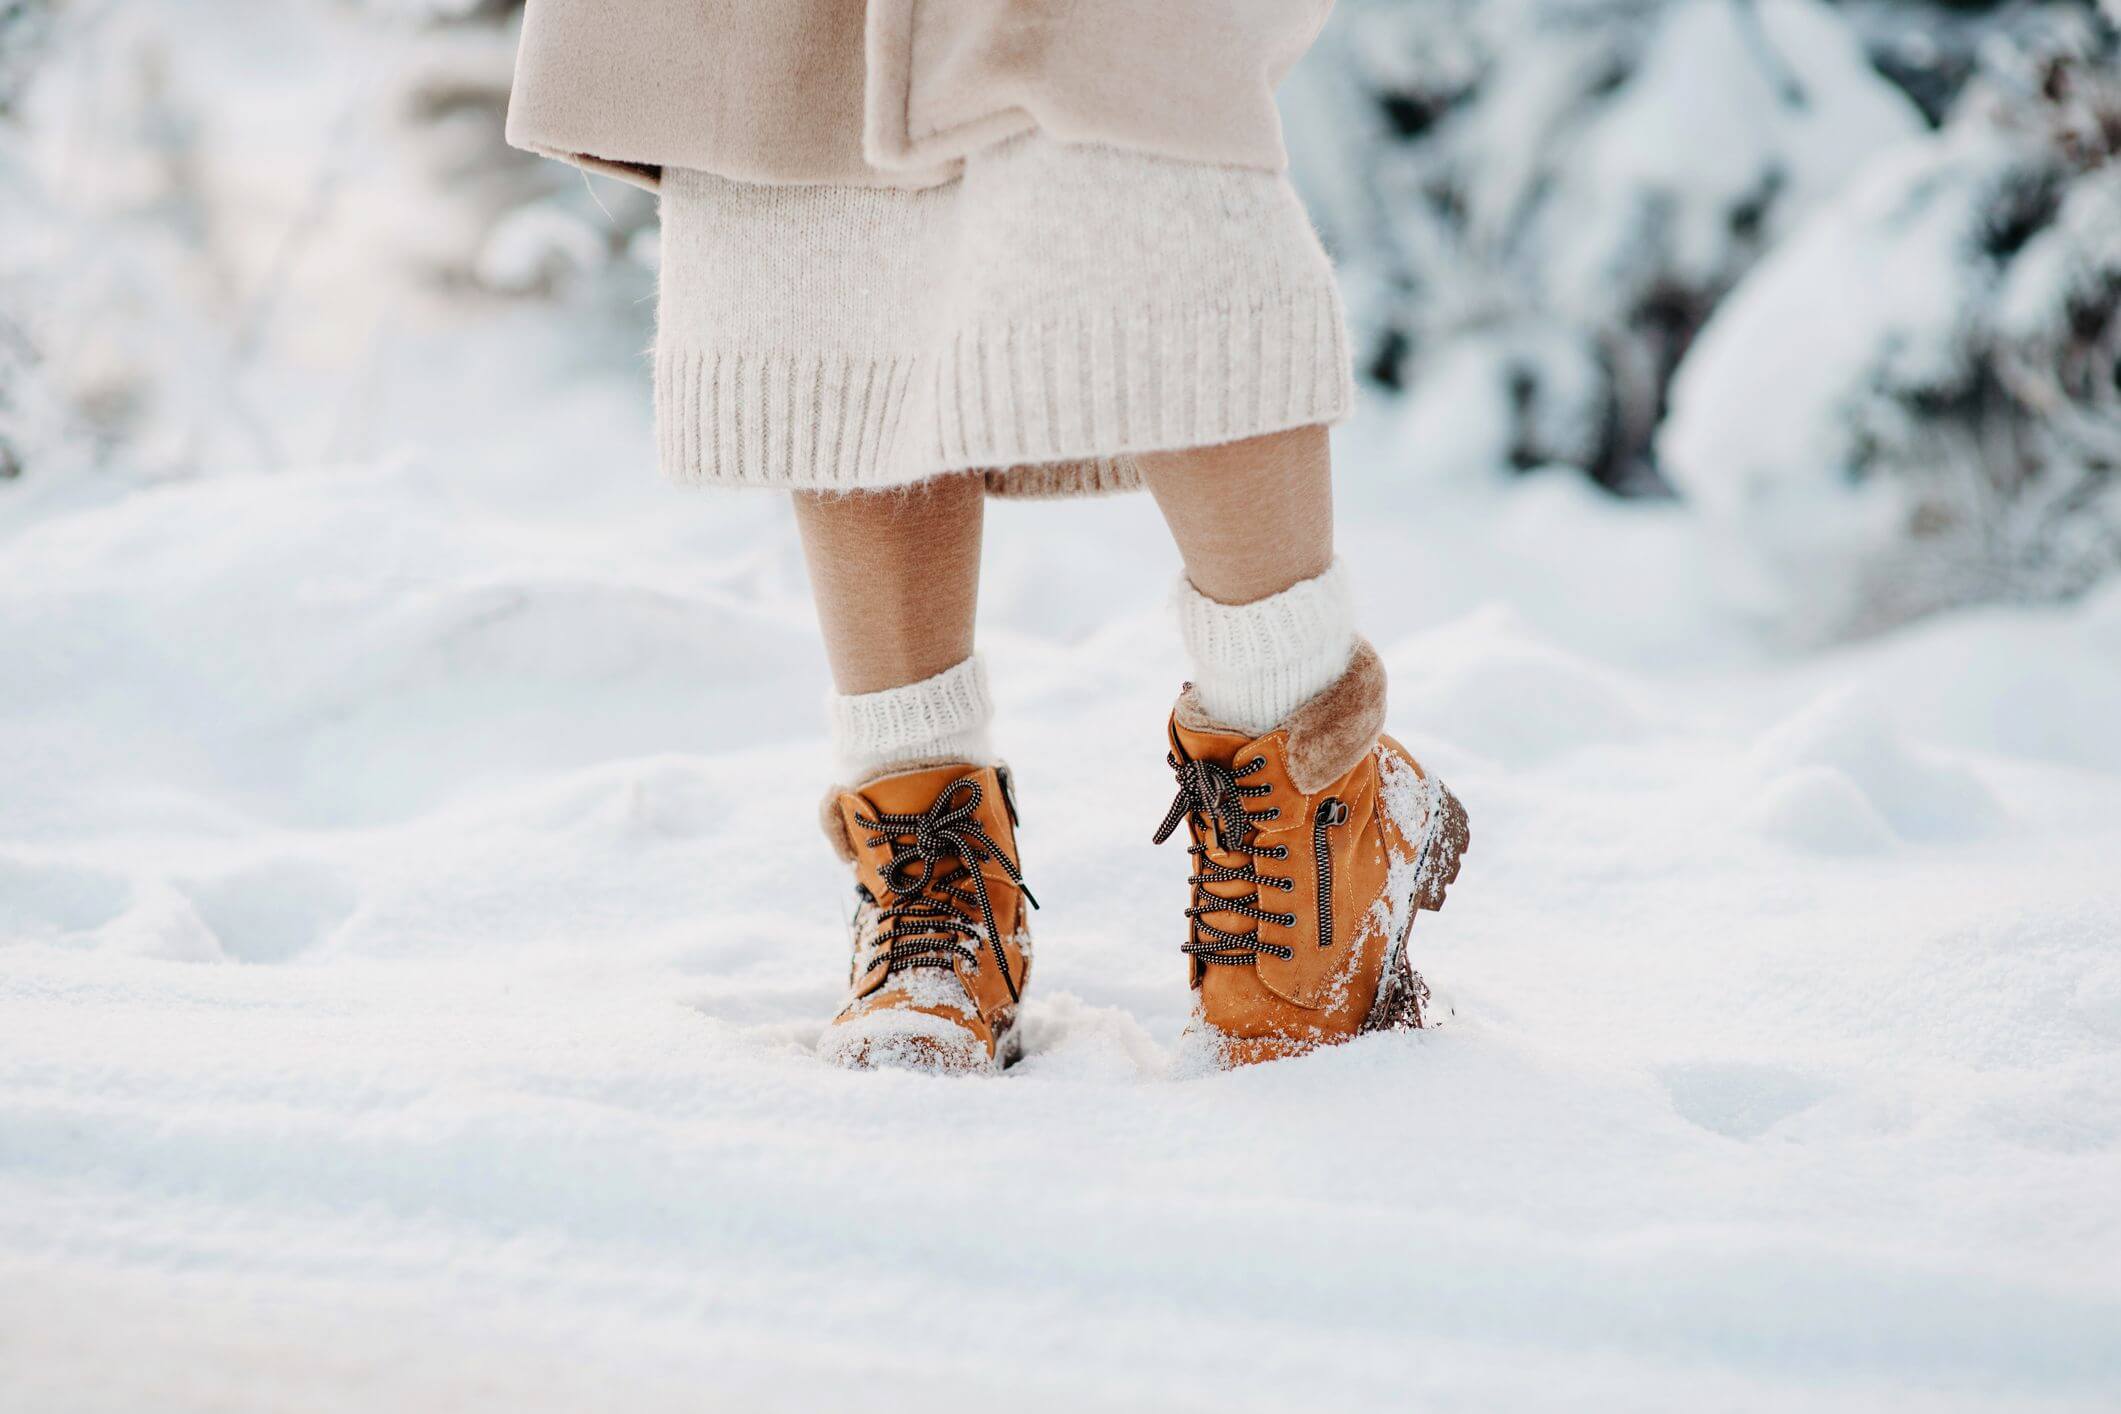 Winter Footwear Essentials for Women: The Ultimate Guide to Finding the Perfect Winter Shoes